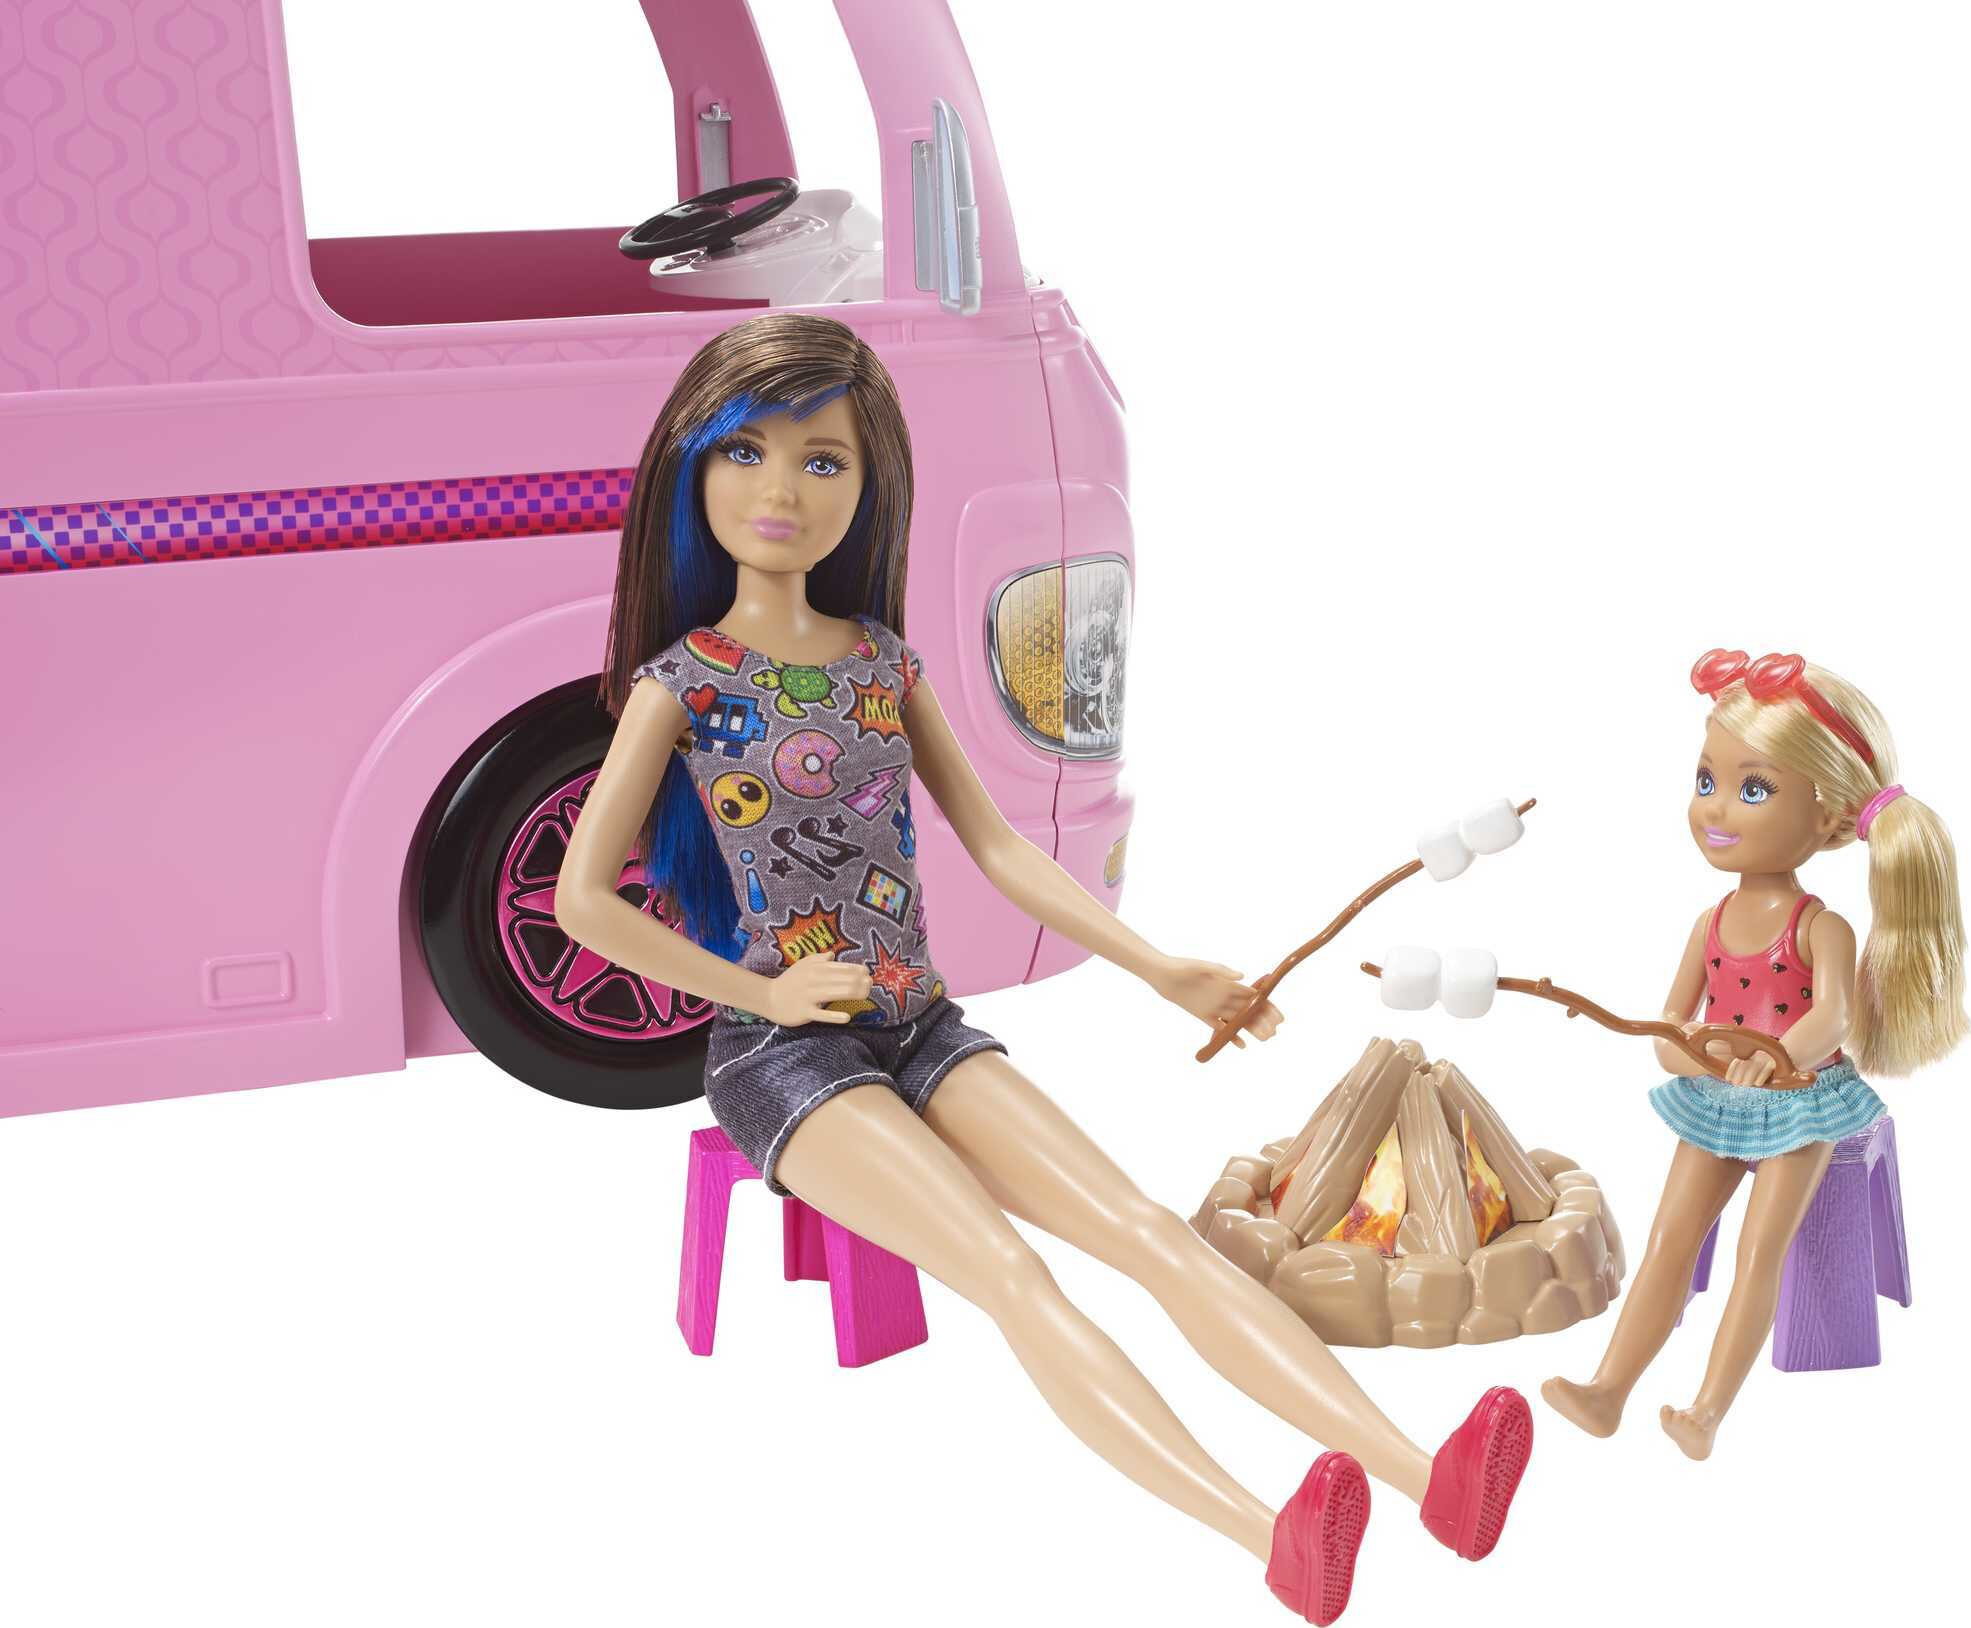 Barbie Camper, Doll Playset with 50 Accessories and Waterslide, Dream Camper - image 6 of 8